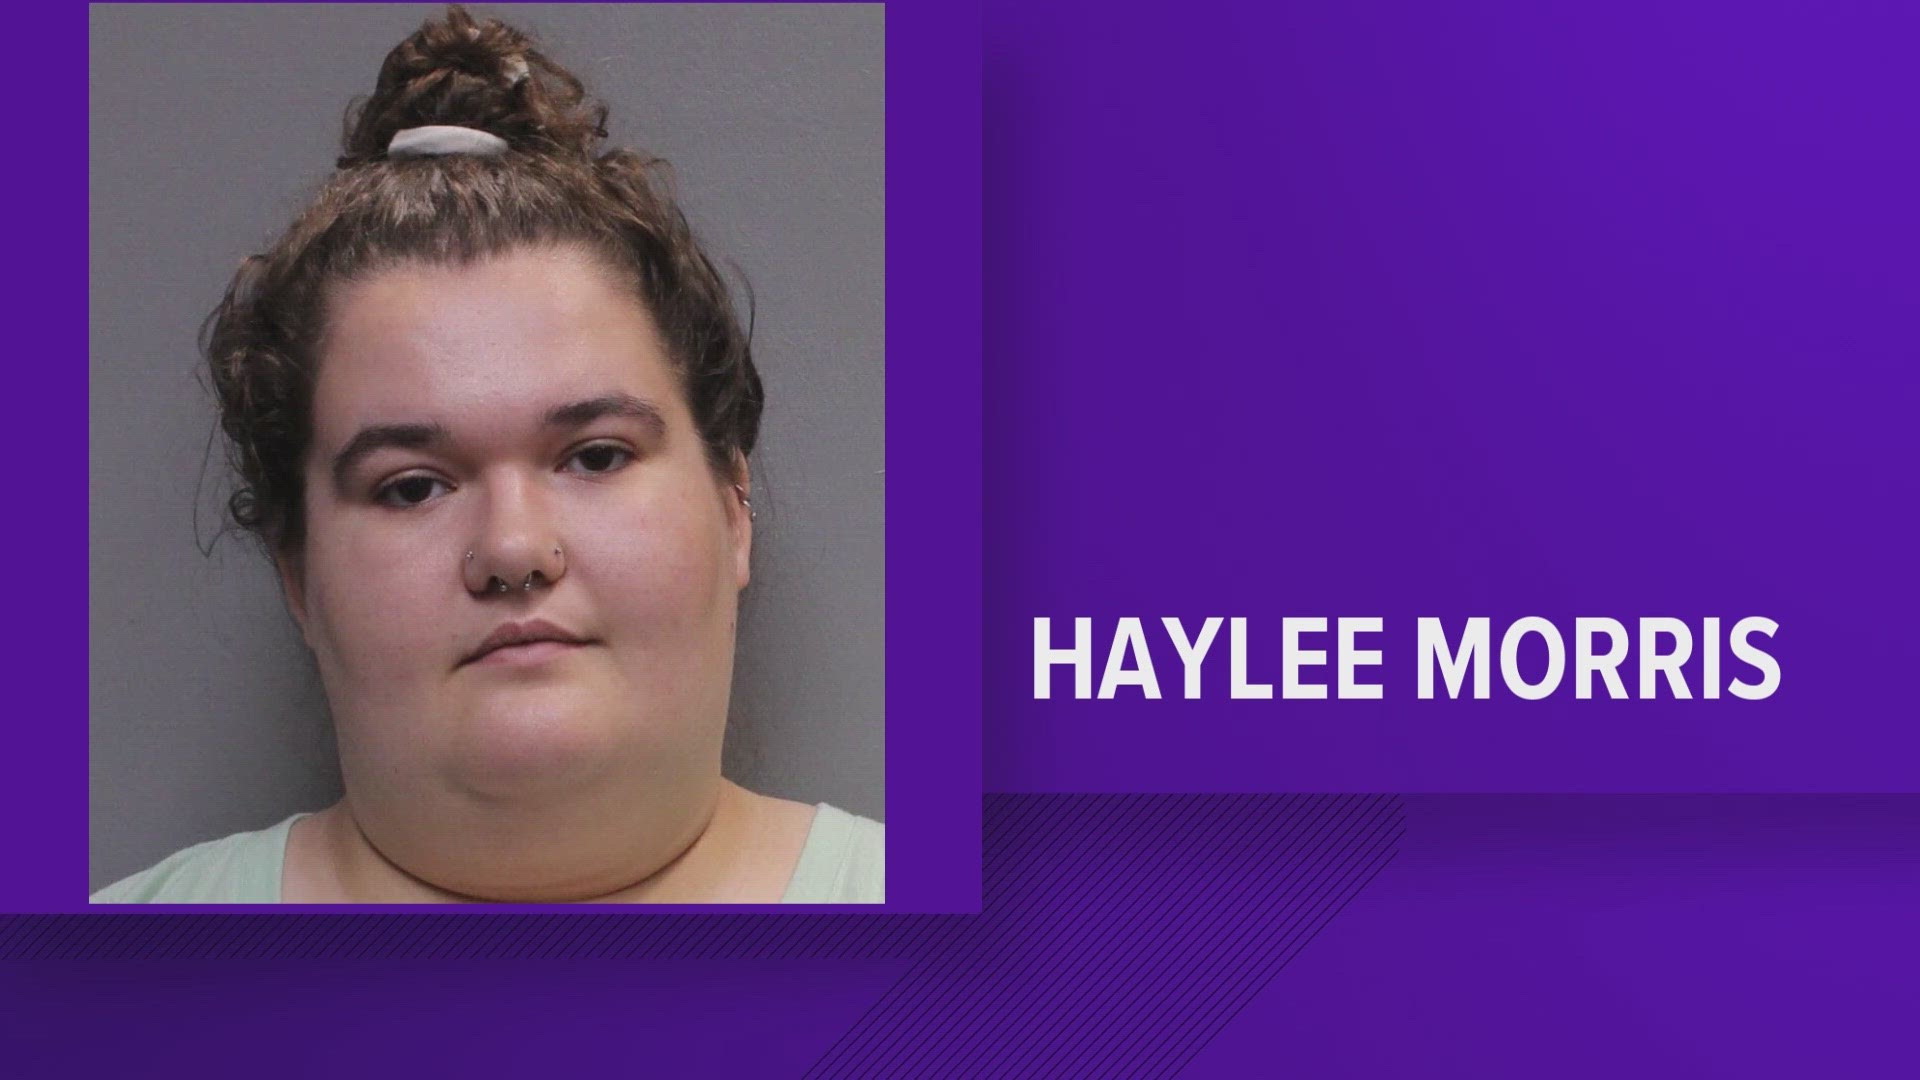 Haylee Morris pleaded guilty to two counts of aggravated cruelty to animals.